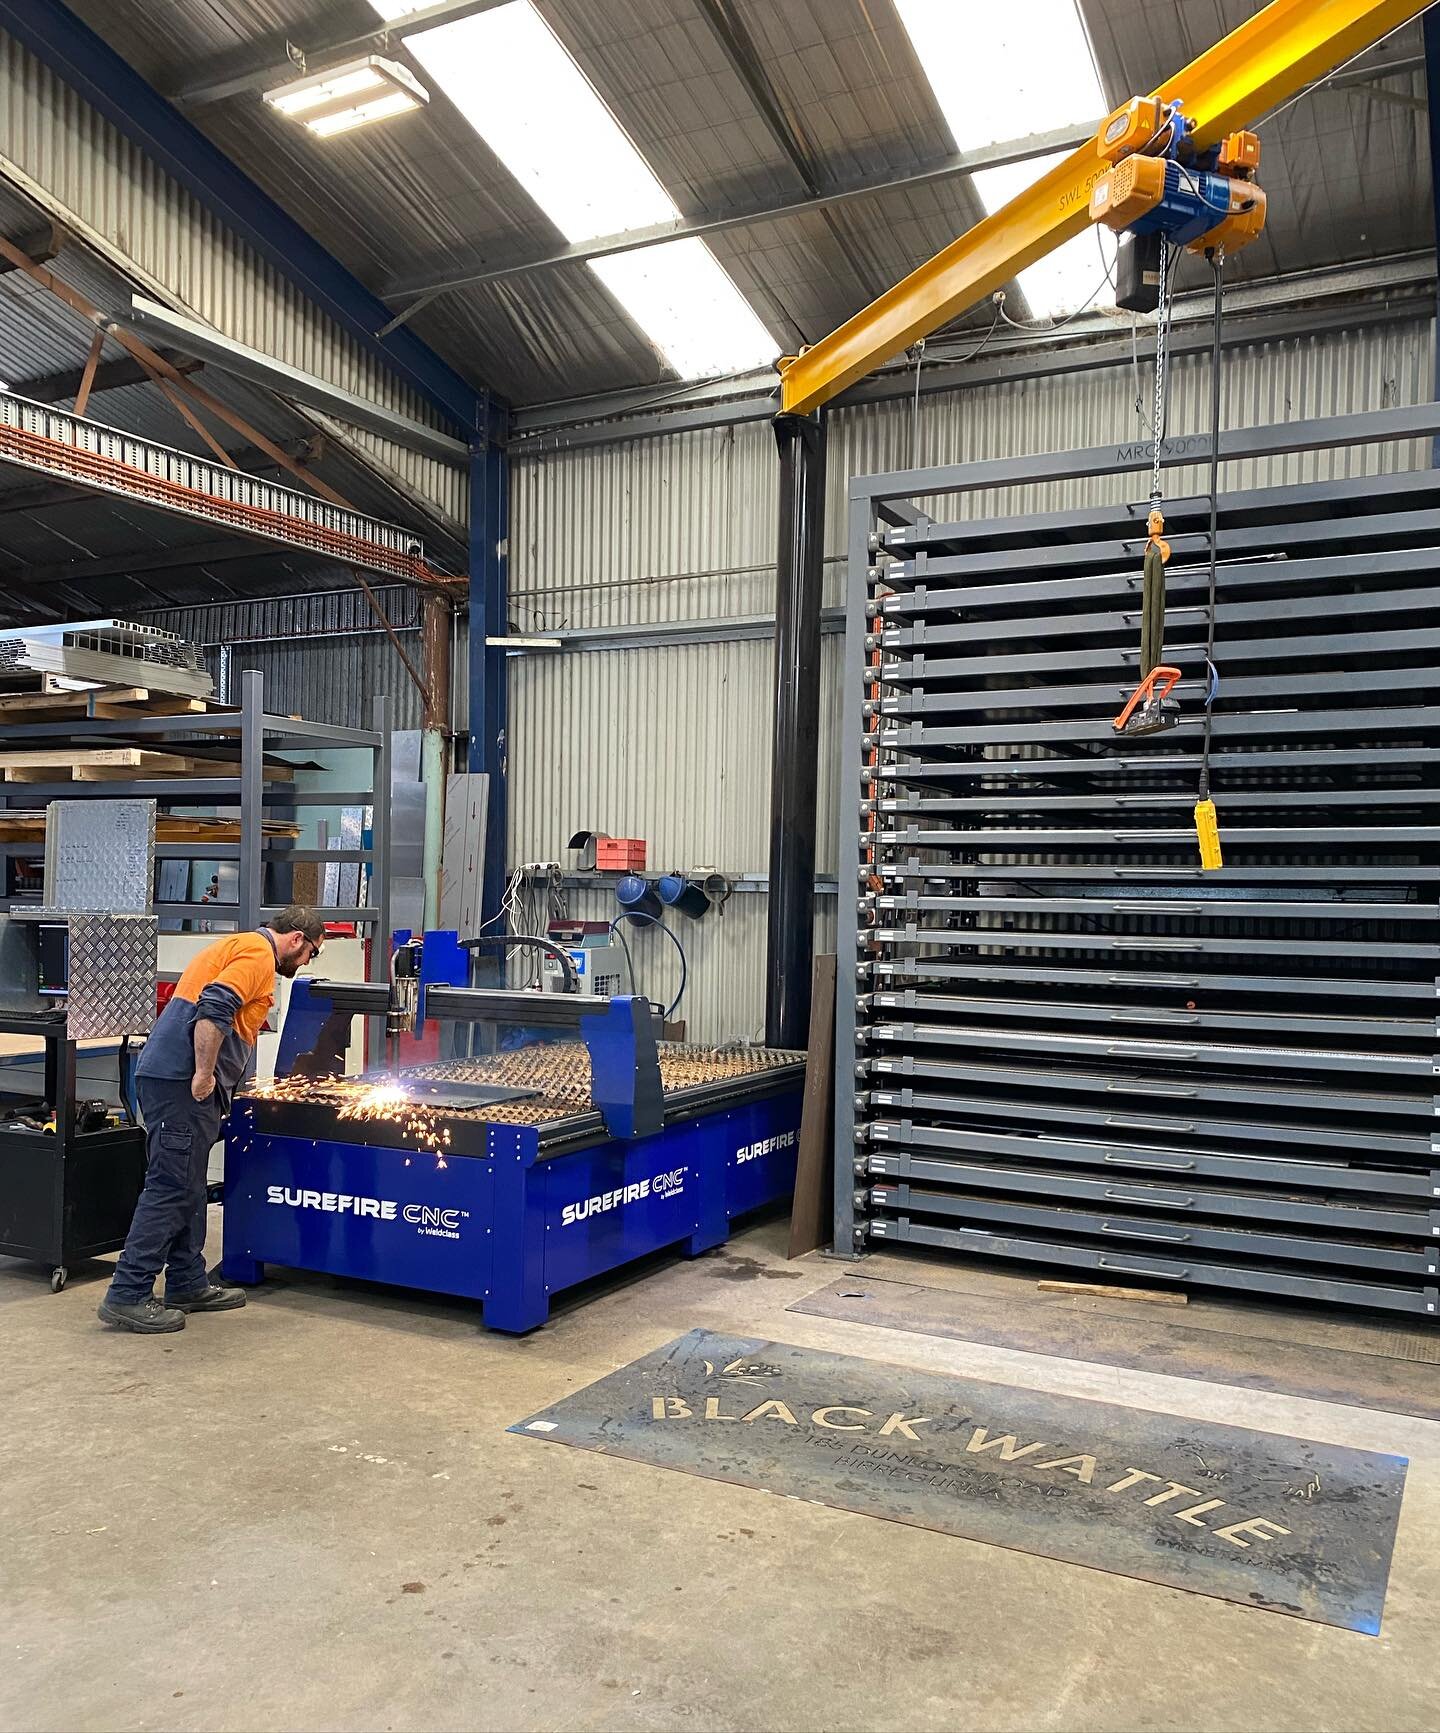 Colac CNC Plasma cutting is available at @loriccoengineering. We supply the steel and can cut a design or unique text/wording or custom design to suit your project. 

CNC Plasma Cutting, Steel Fabrications, Engineering, Aluminium Welding, Stainless S